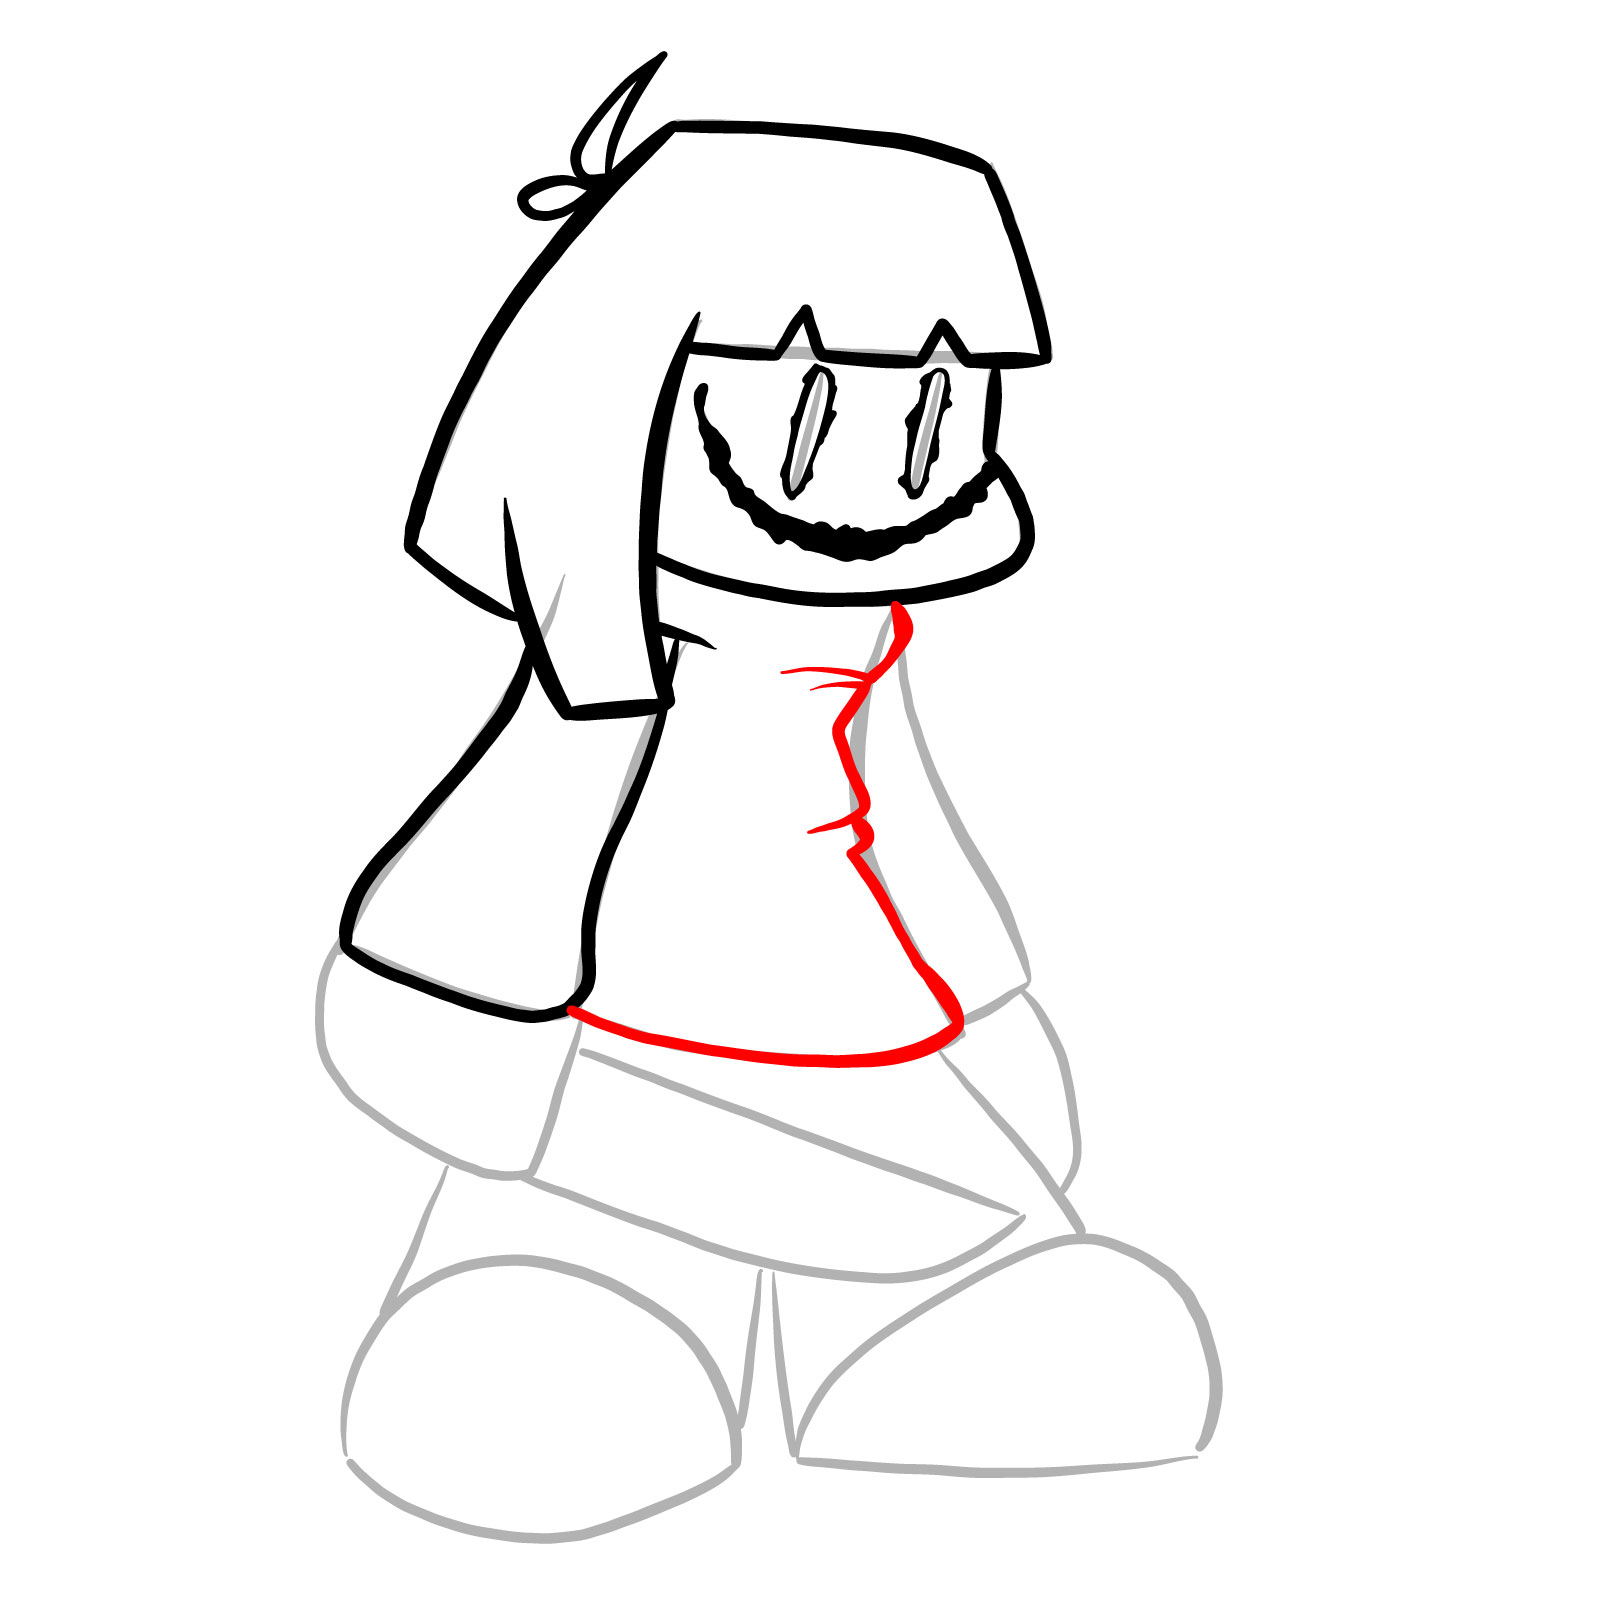 How to draw Chara from Friday Night Dustin' - step 12